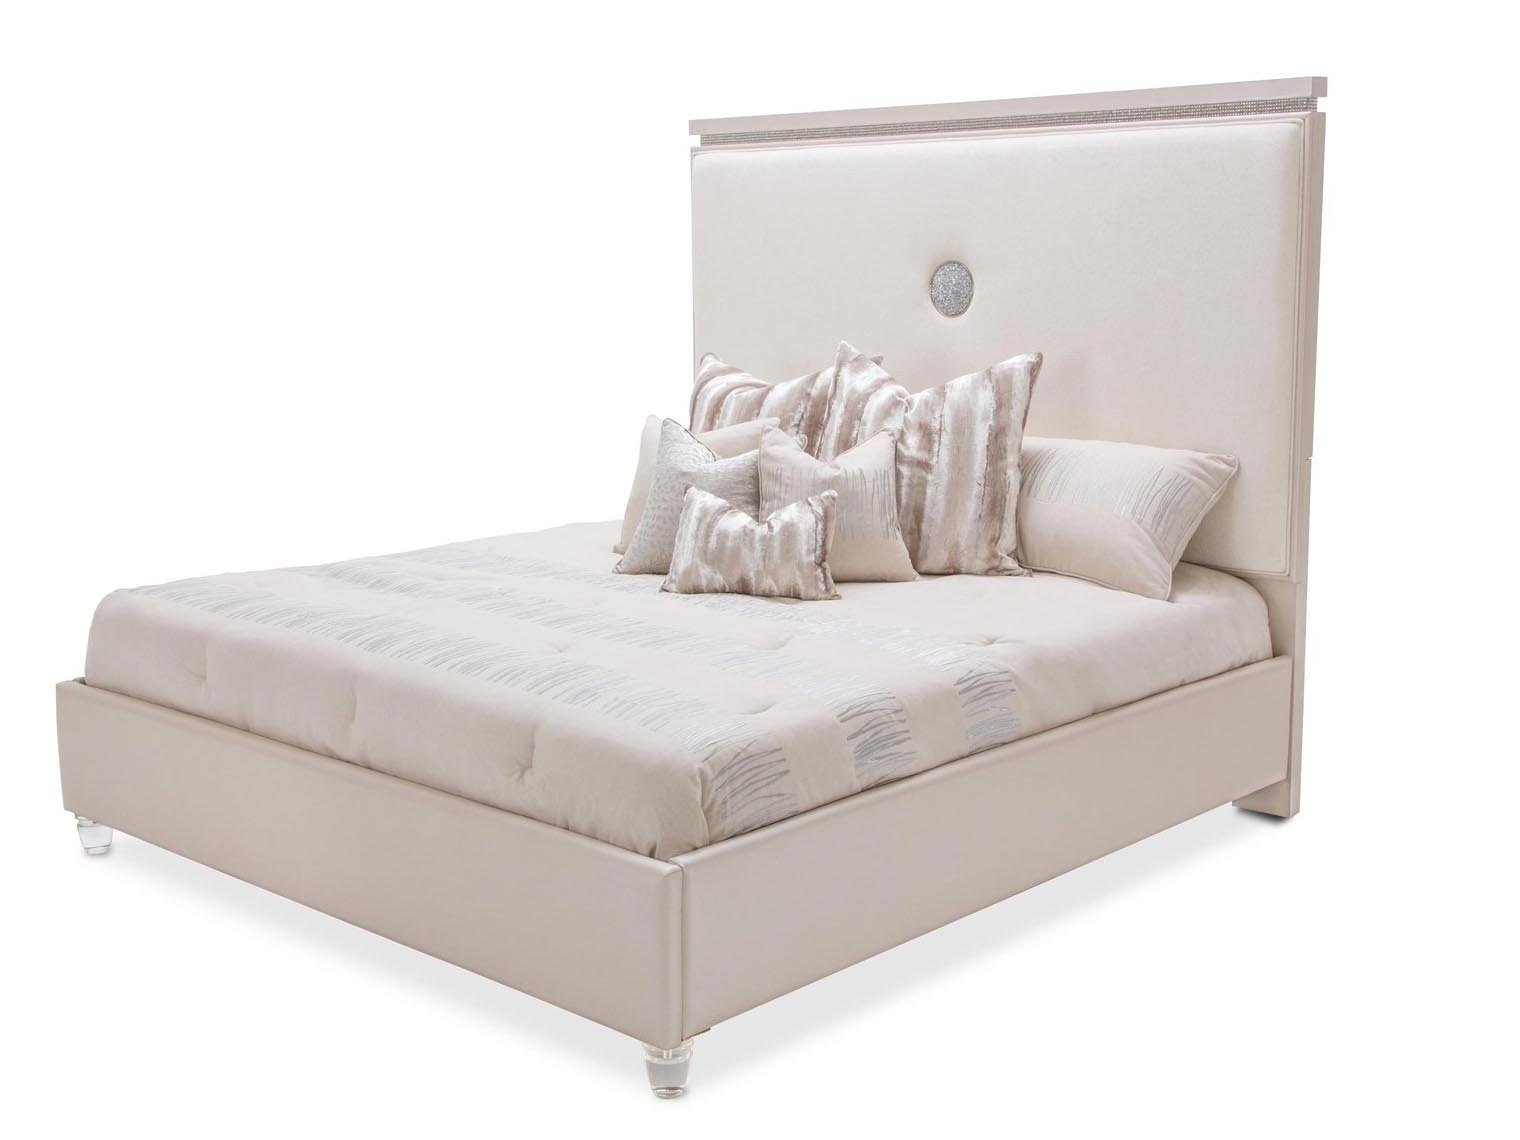 Aico Amini Glimmering Heights 5 PC Cal King Upholstered Bedroom Set with Chest in Ivory